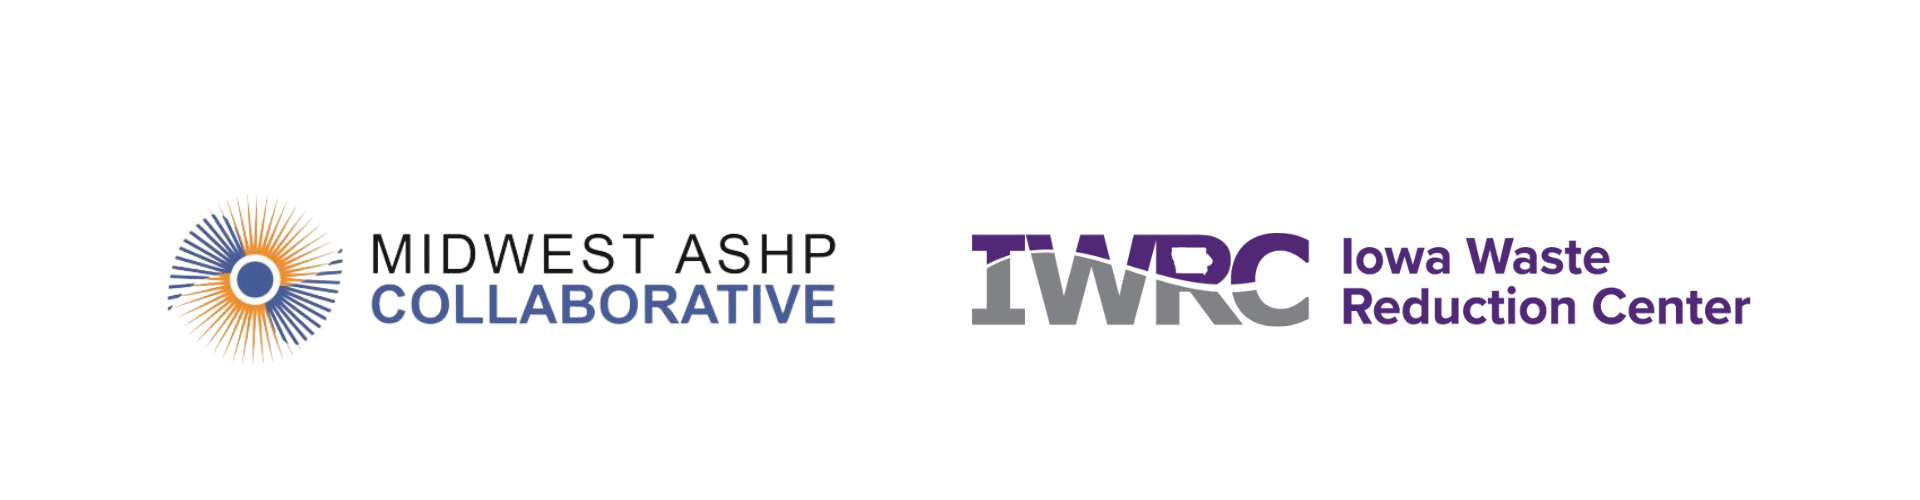 Midwest Collaborative logo and IWRC logo